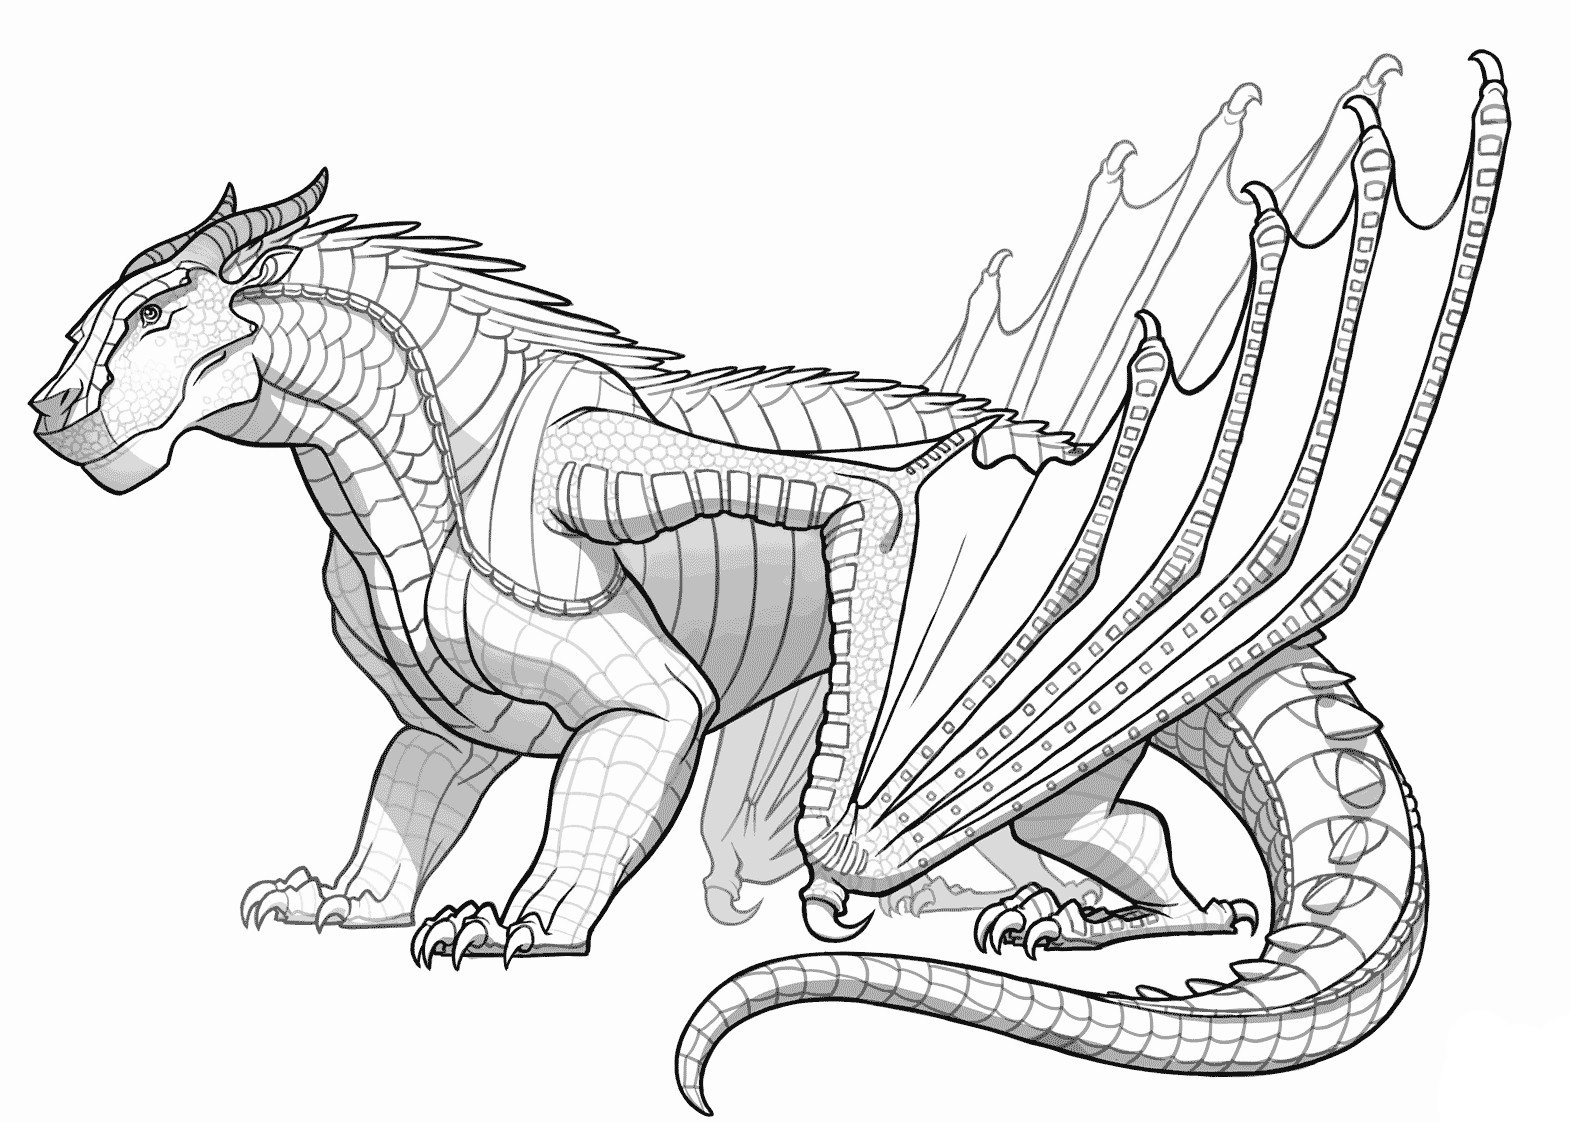 cute printable dragon coloring pages